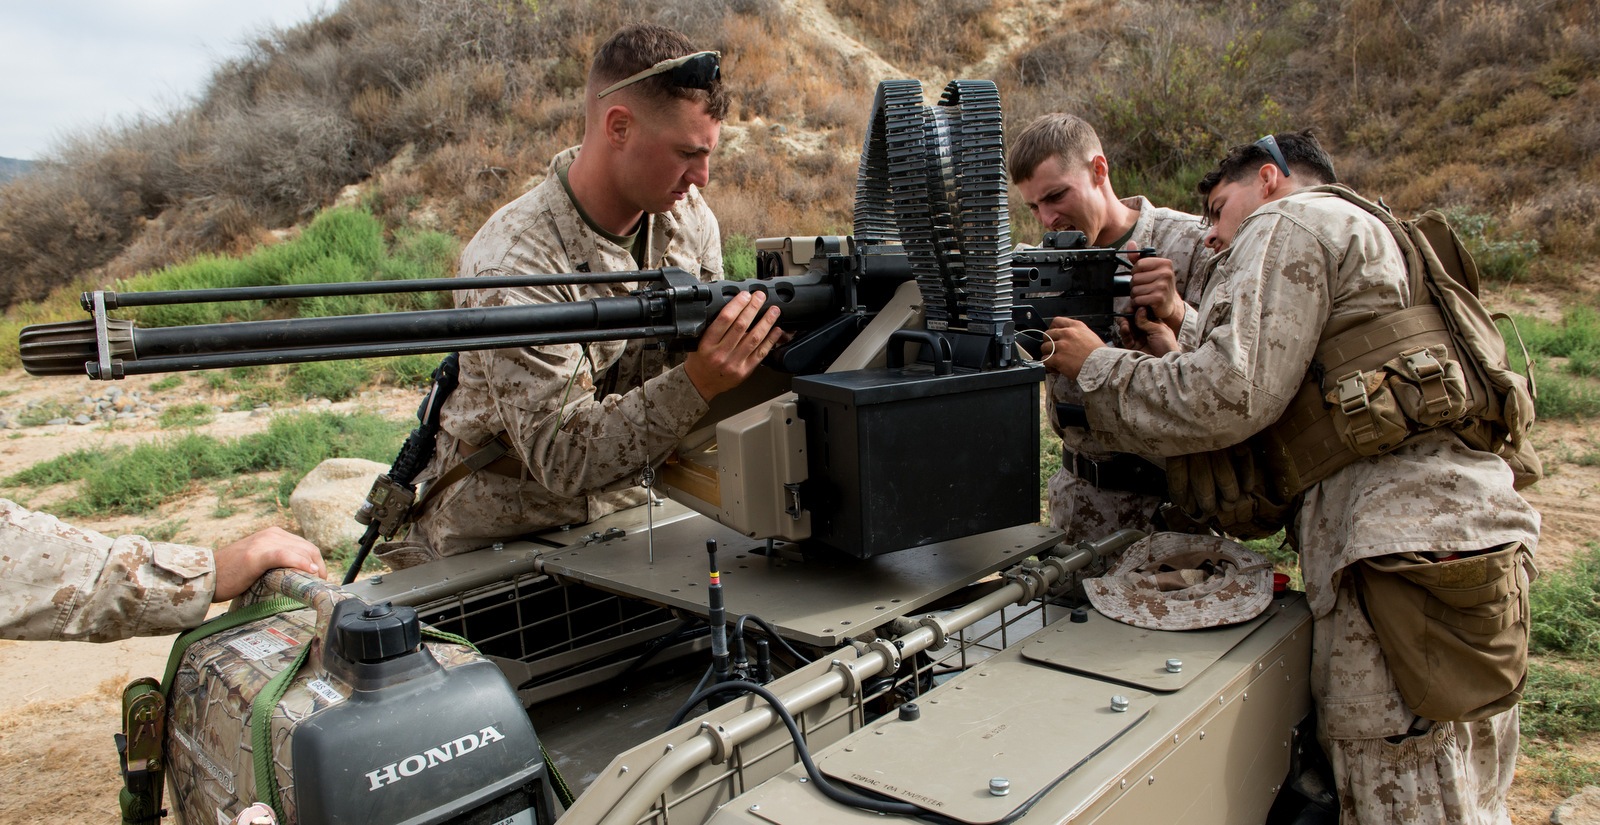 U.S. Marines adjust a mounted gun on the Multi Utility Tactical Transport (MUTT) for testing at Marine Corps Base Camp Pendleton, Calif., July 8, 2016. (U.S. Marine Corps photo)